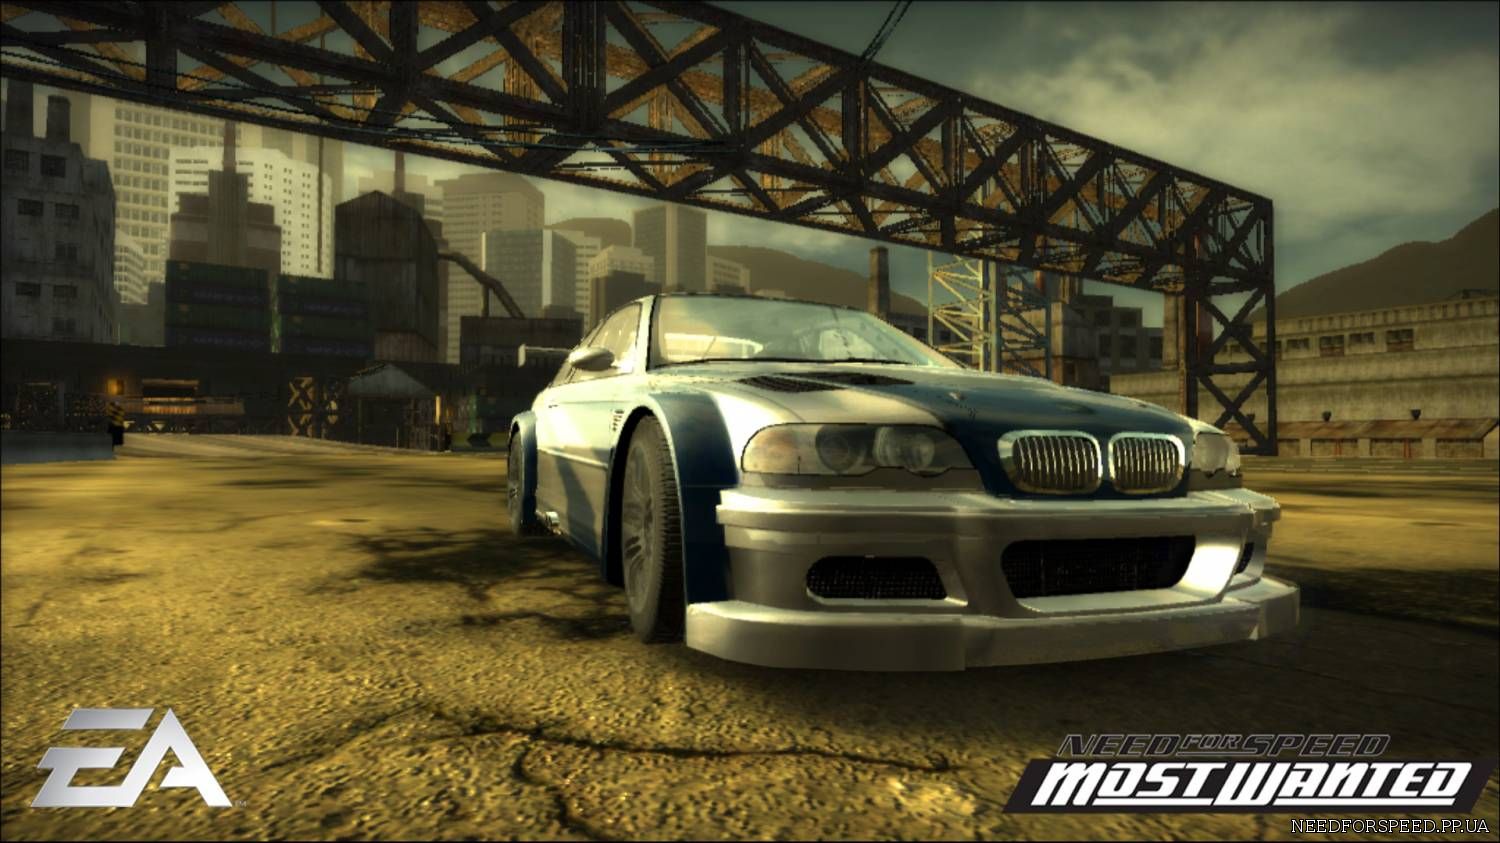 need for speed most wanted 2005 platforms